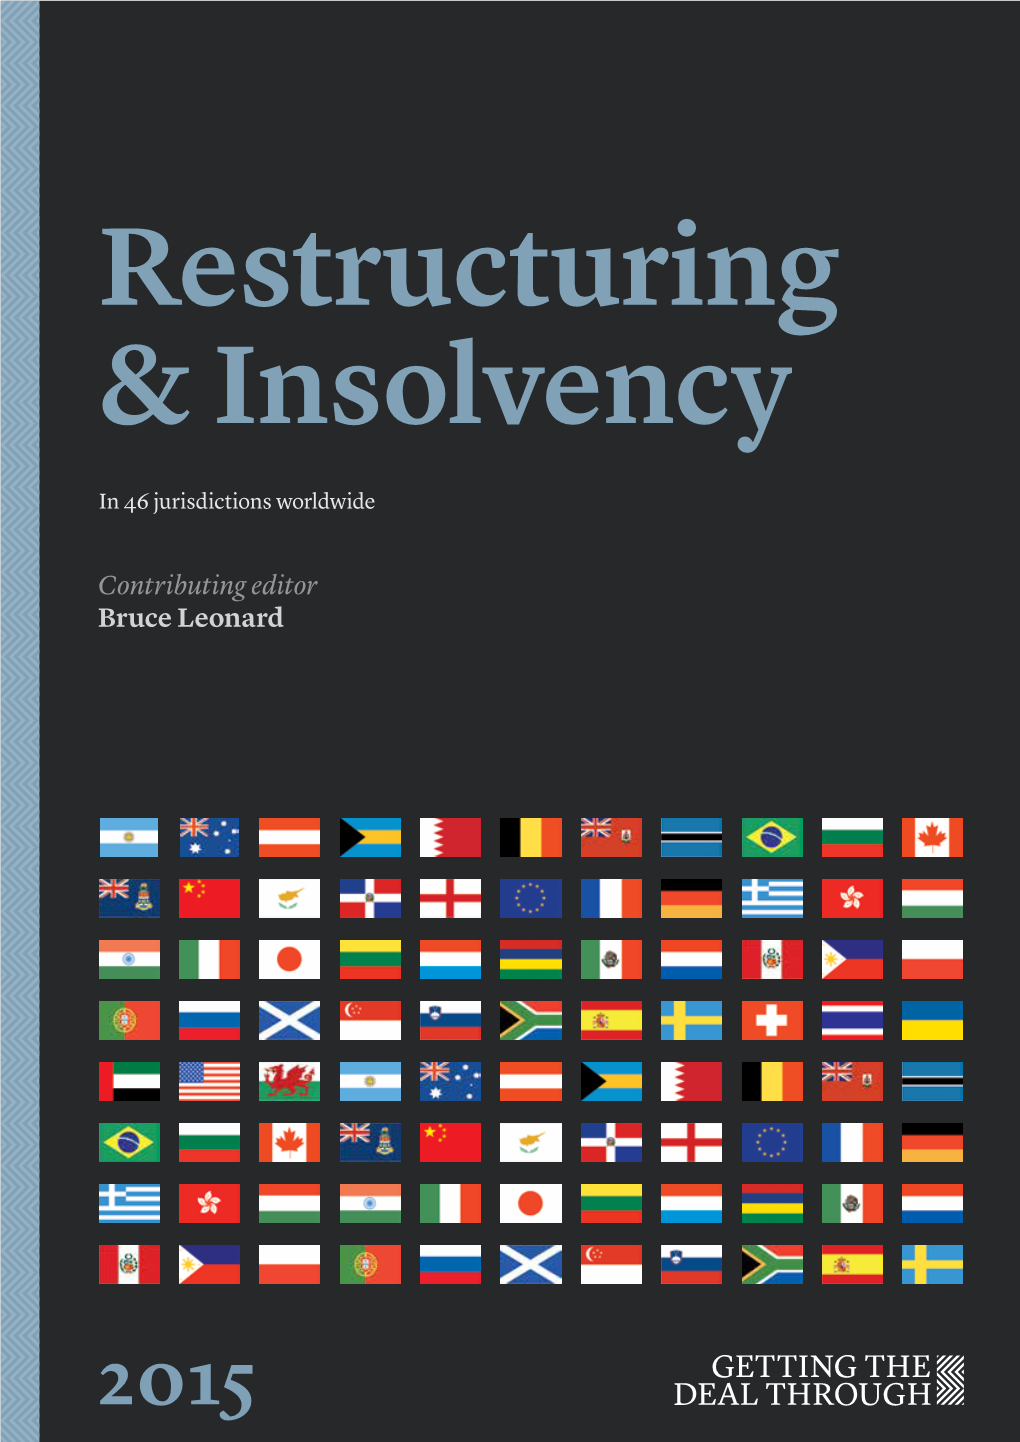 Restructuring & Insolvency